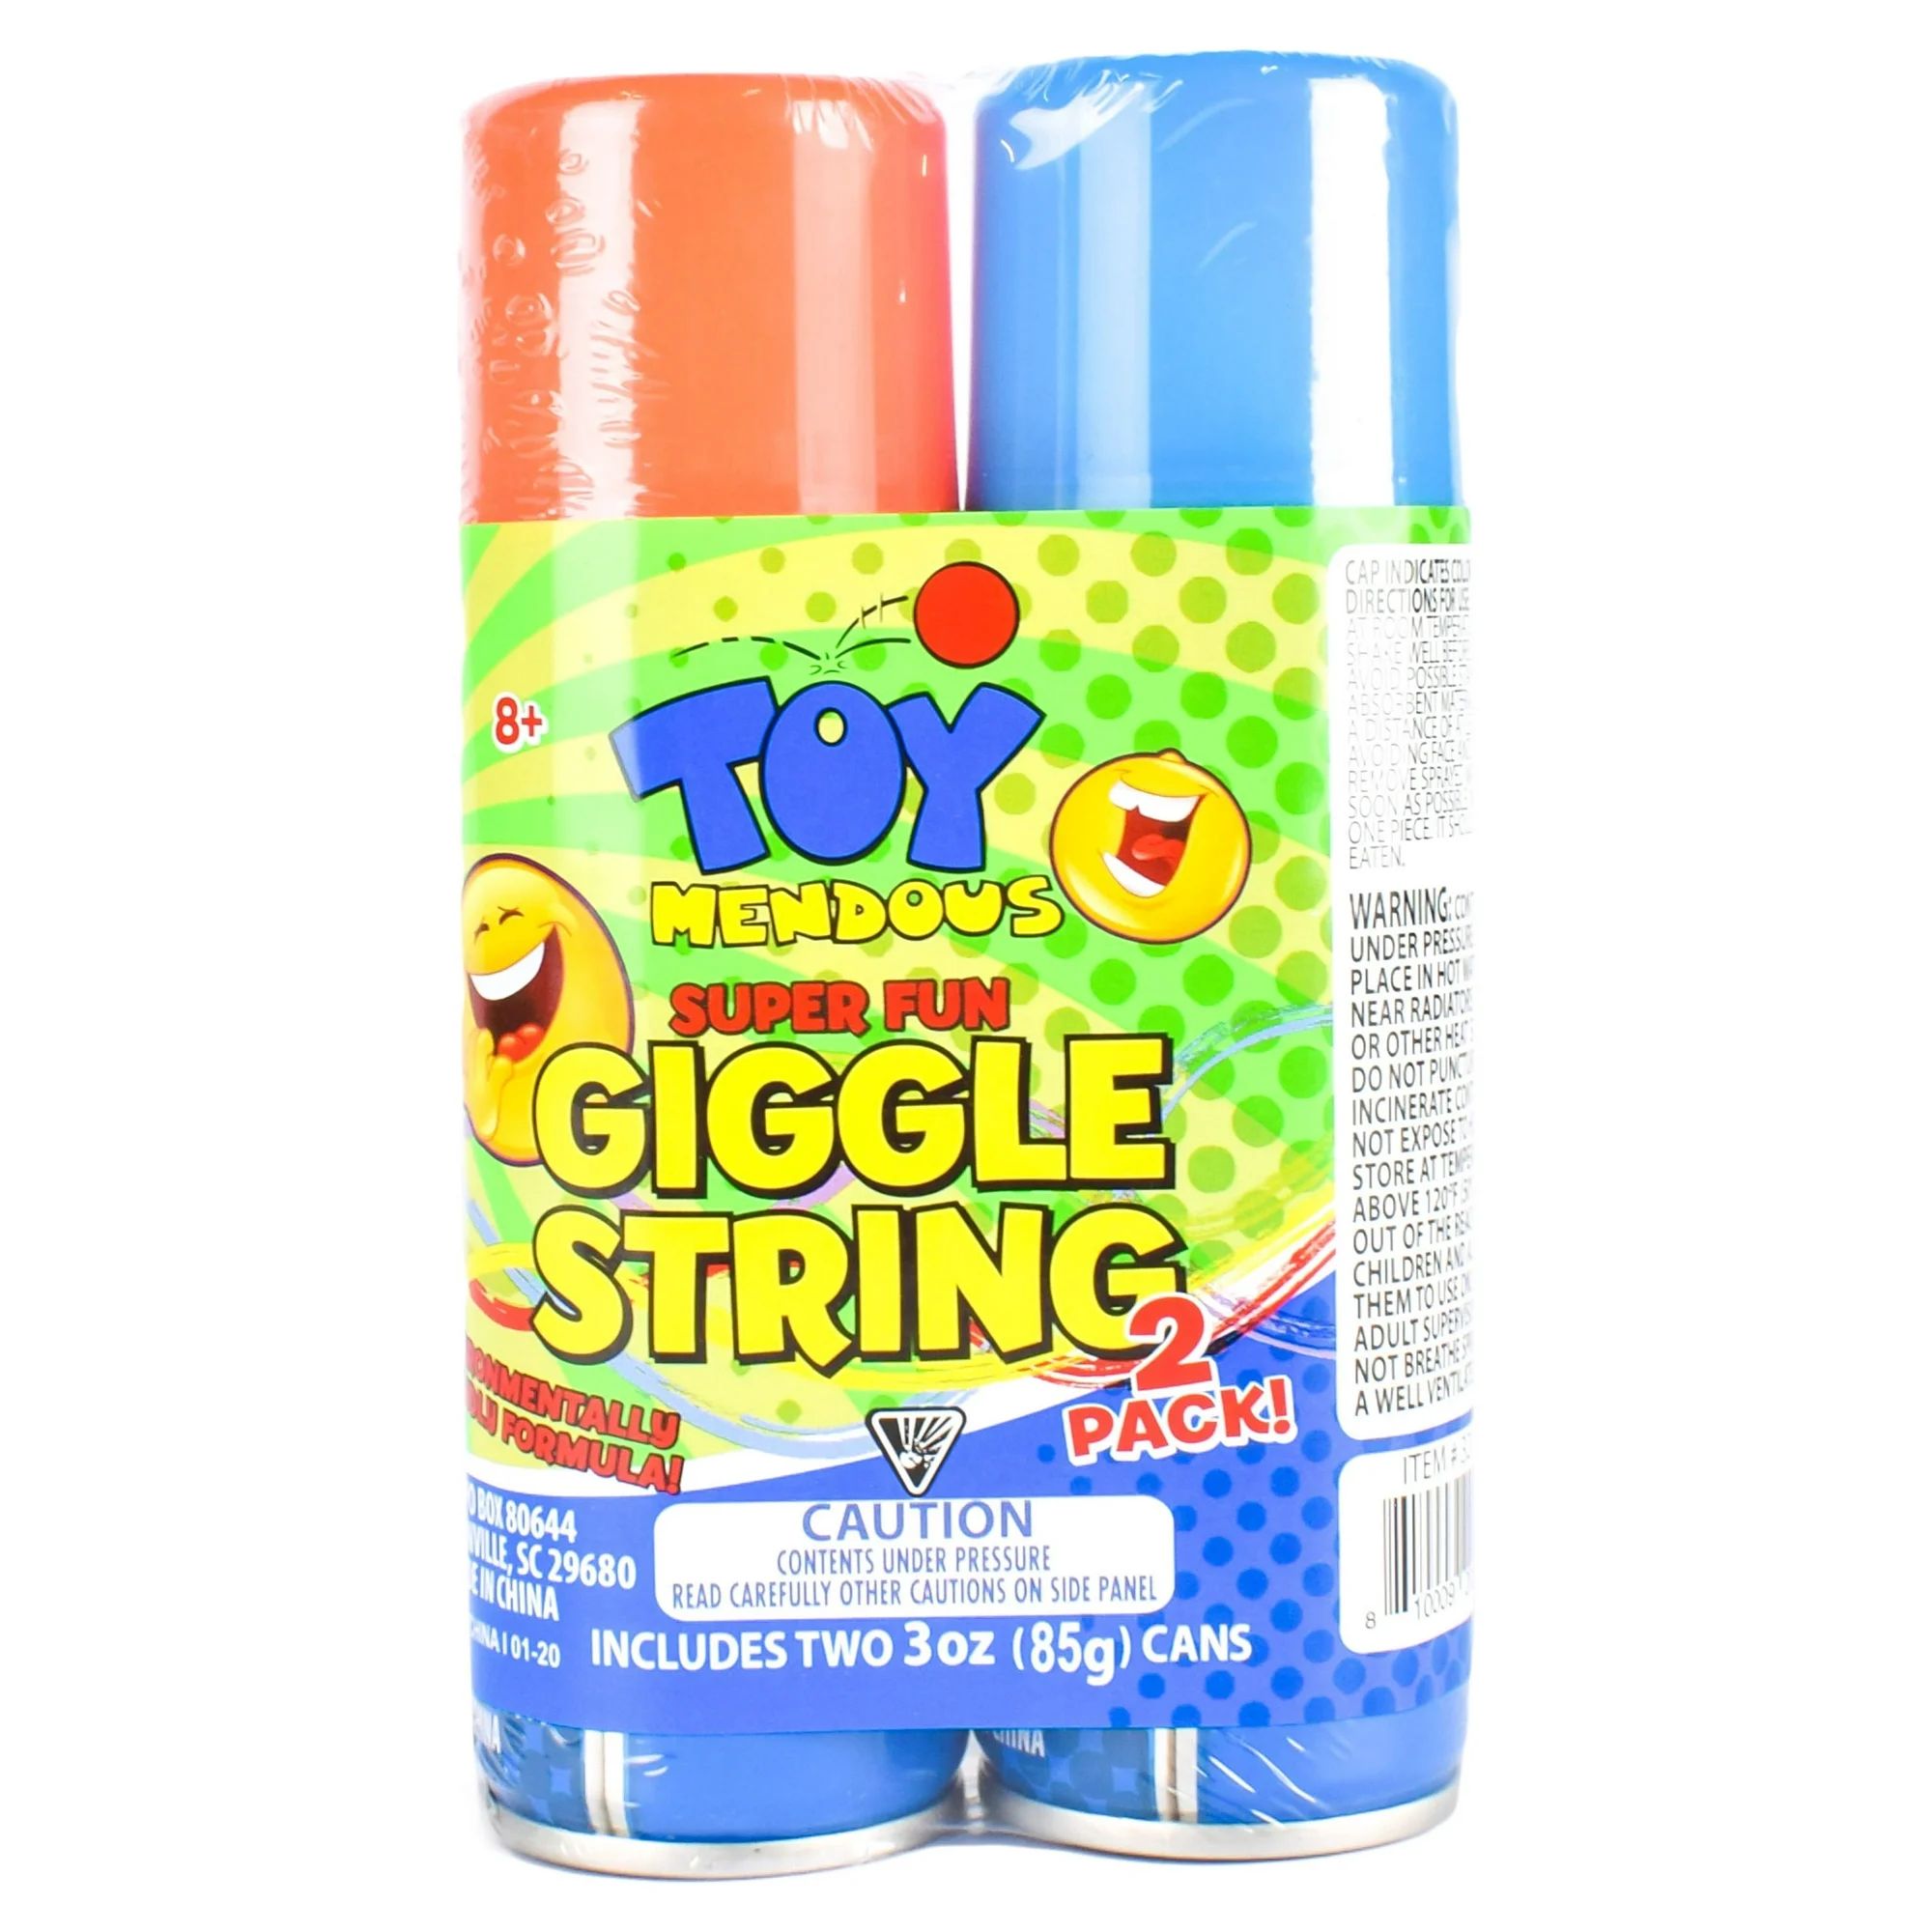 Toymendous Giggle String 2-Pack 3 oz. Bright Colored Streamers, Perfect for Any Party or Celebrat... | Walmart (US)